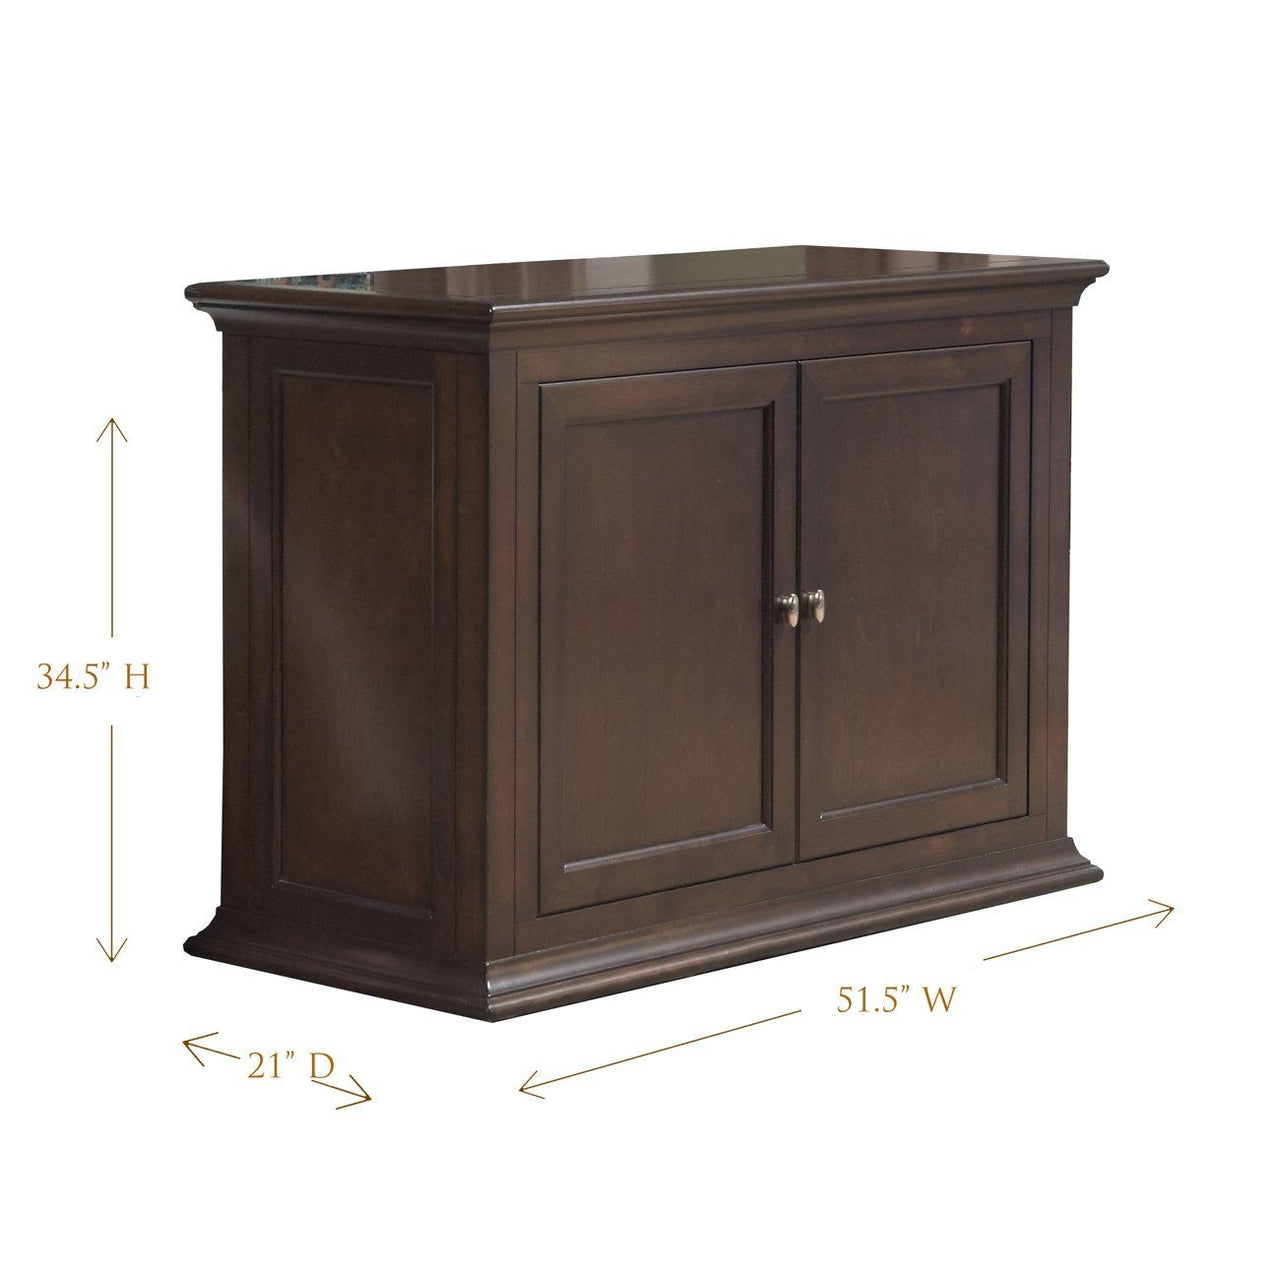 Touchstone Harrison Tv Lift Cabinets For Up To 46” Flat Screen Tv’S Tv Lift Cabinets Touchstone 